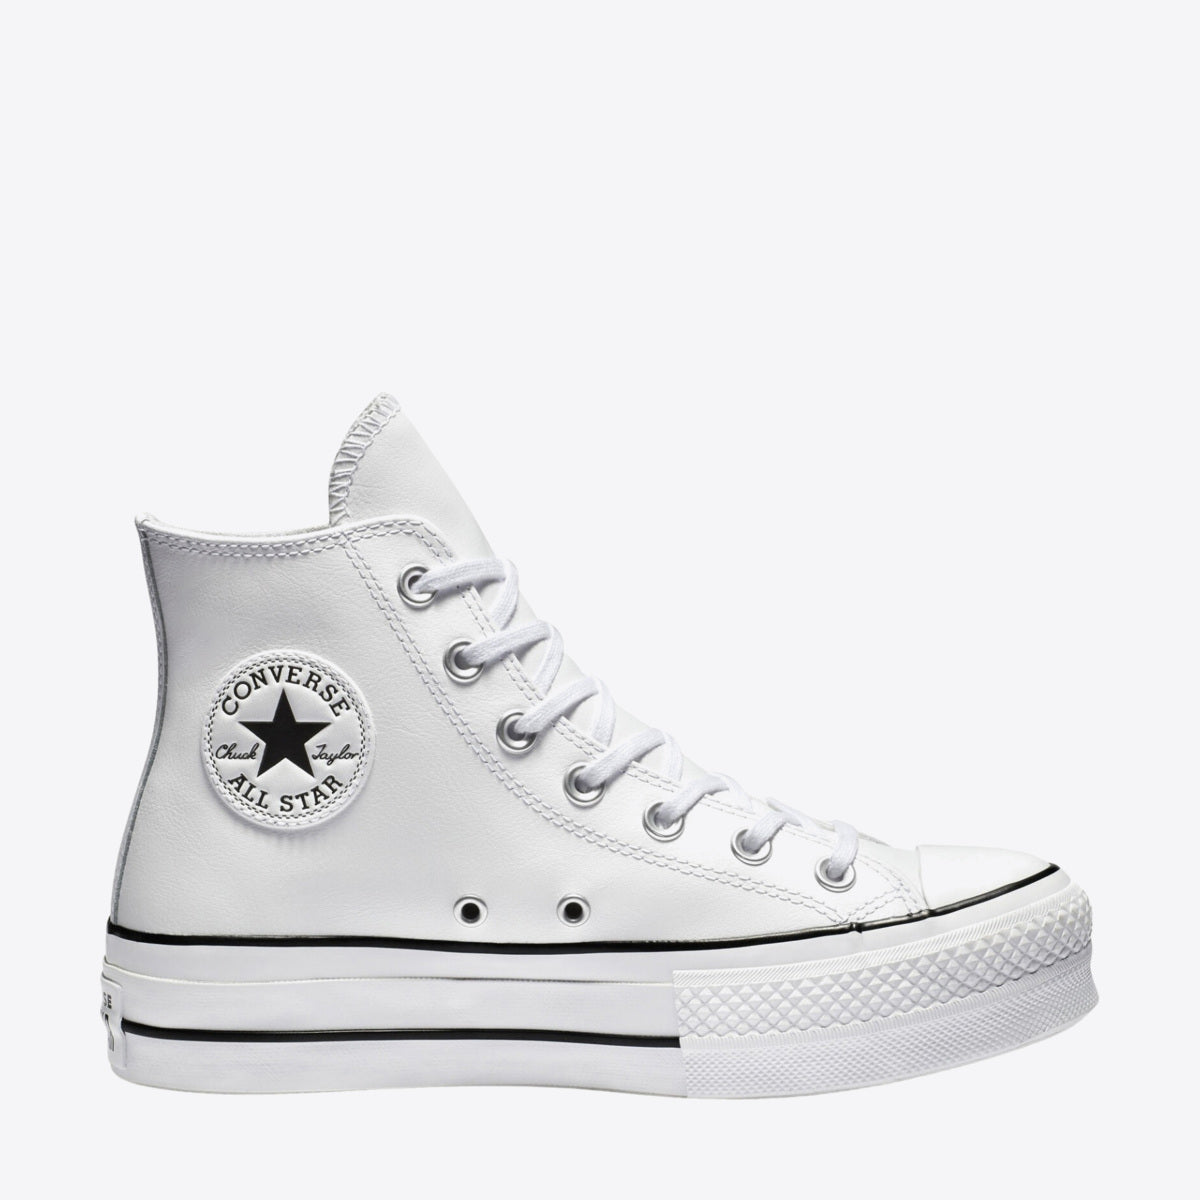  Chuck Taylor All Star Lift Hi White Leather